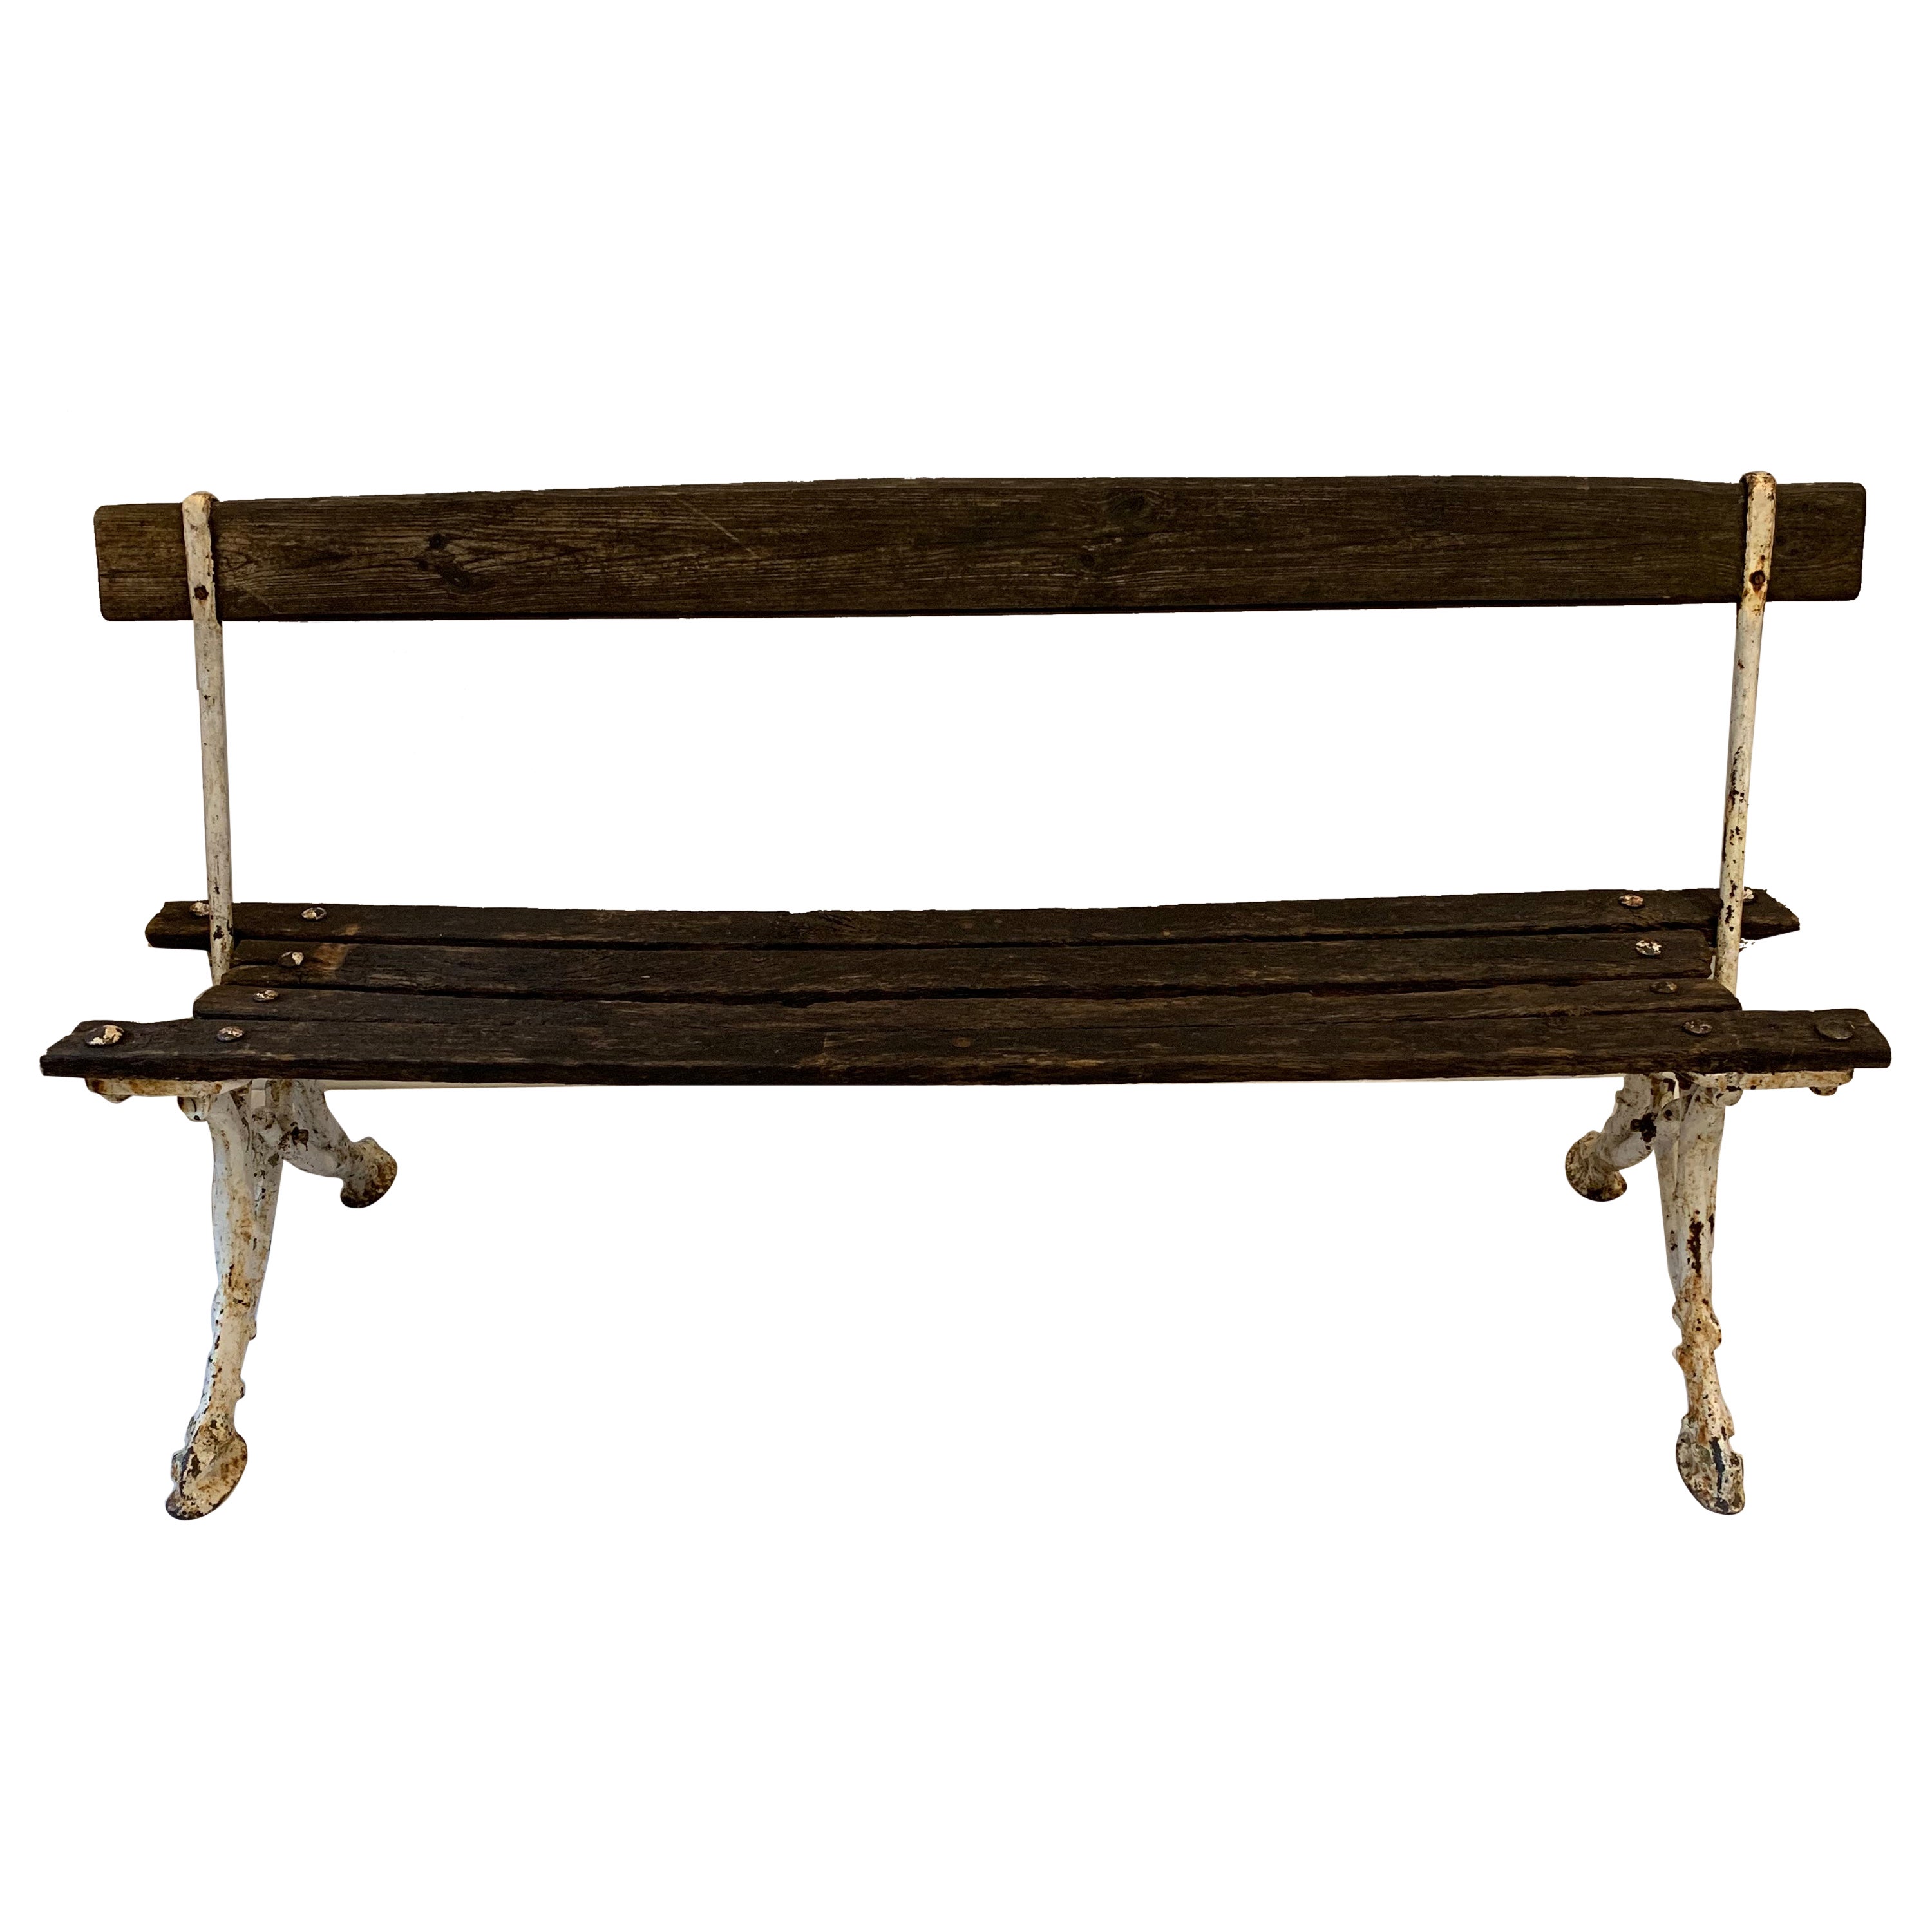 Circa 1900s French Faux Bois Rustic Painted Cast Iron Garden Bench  For Sale